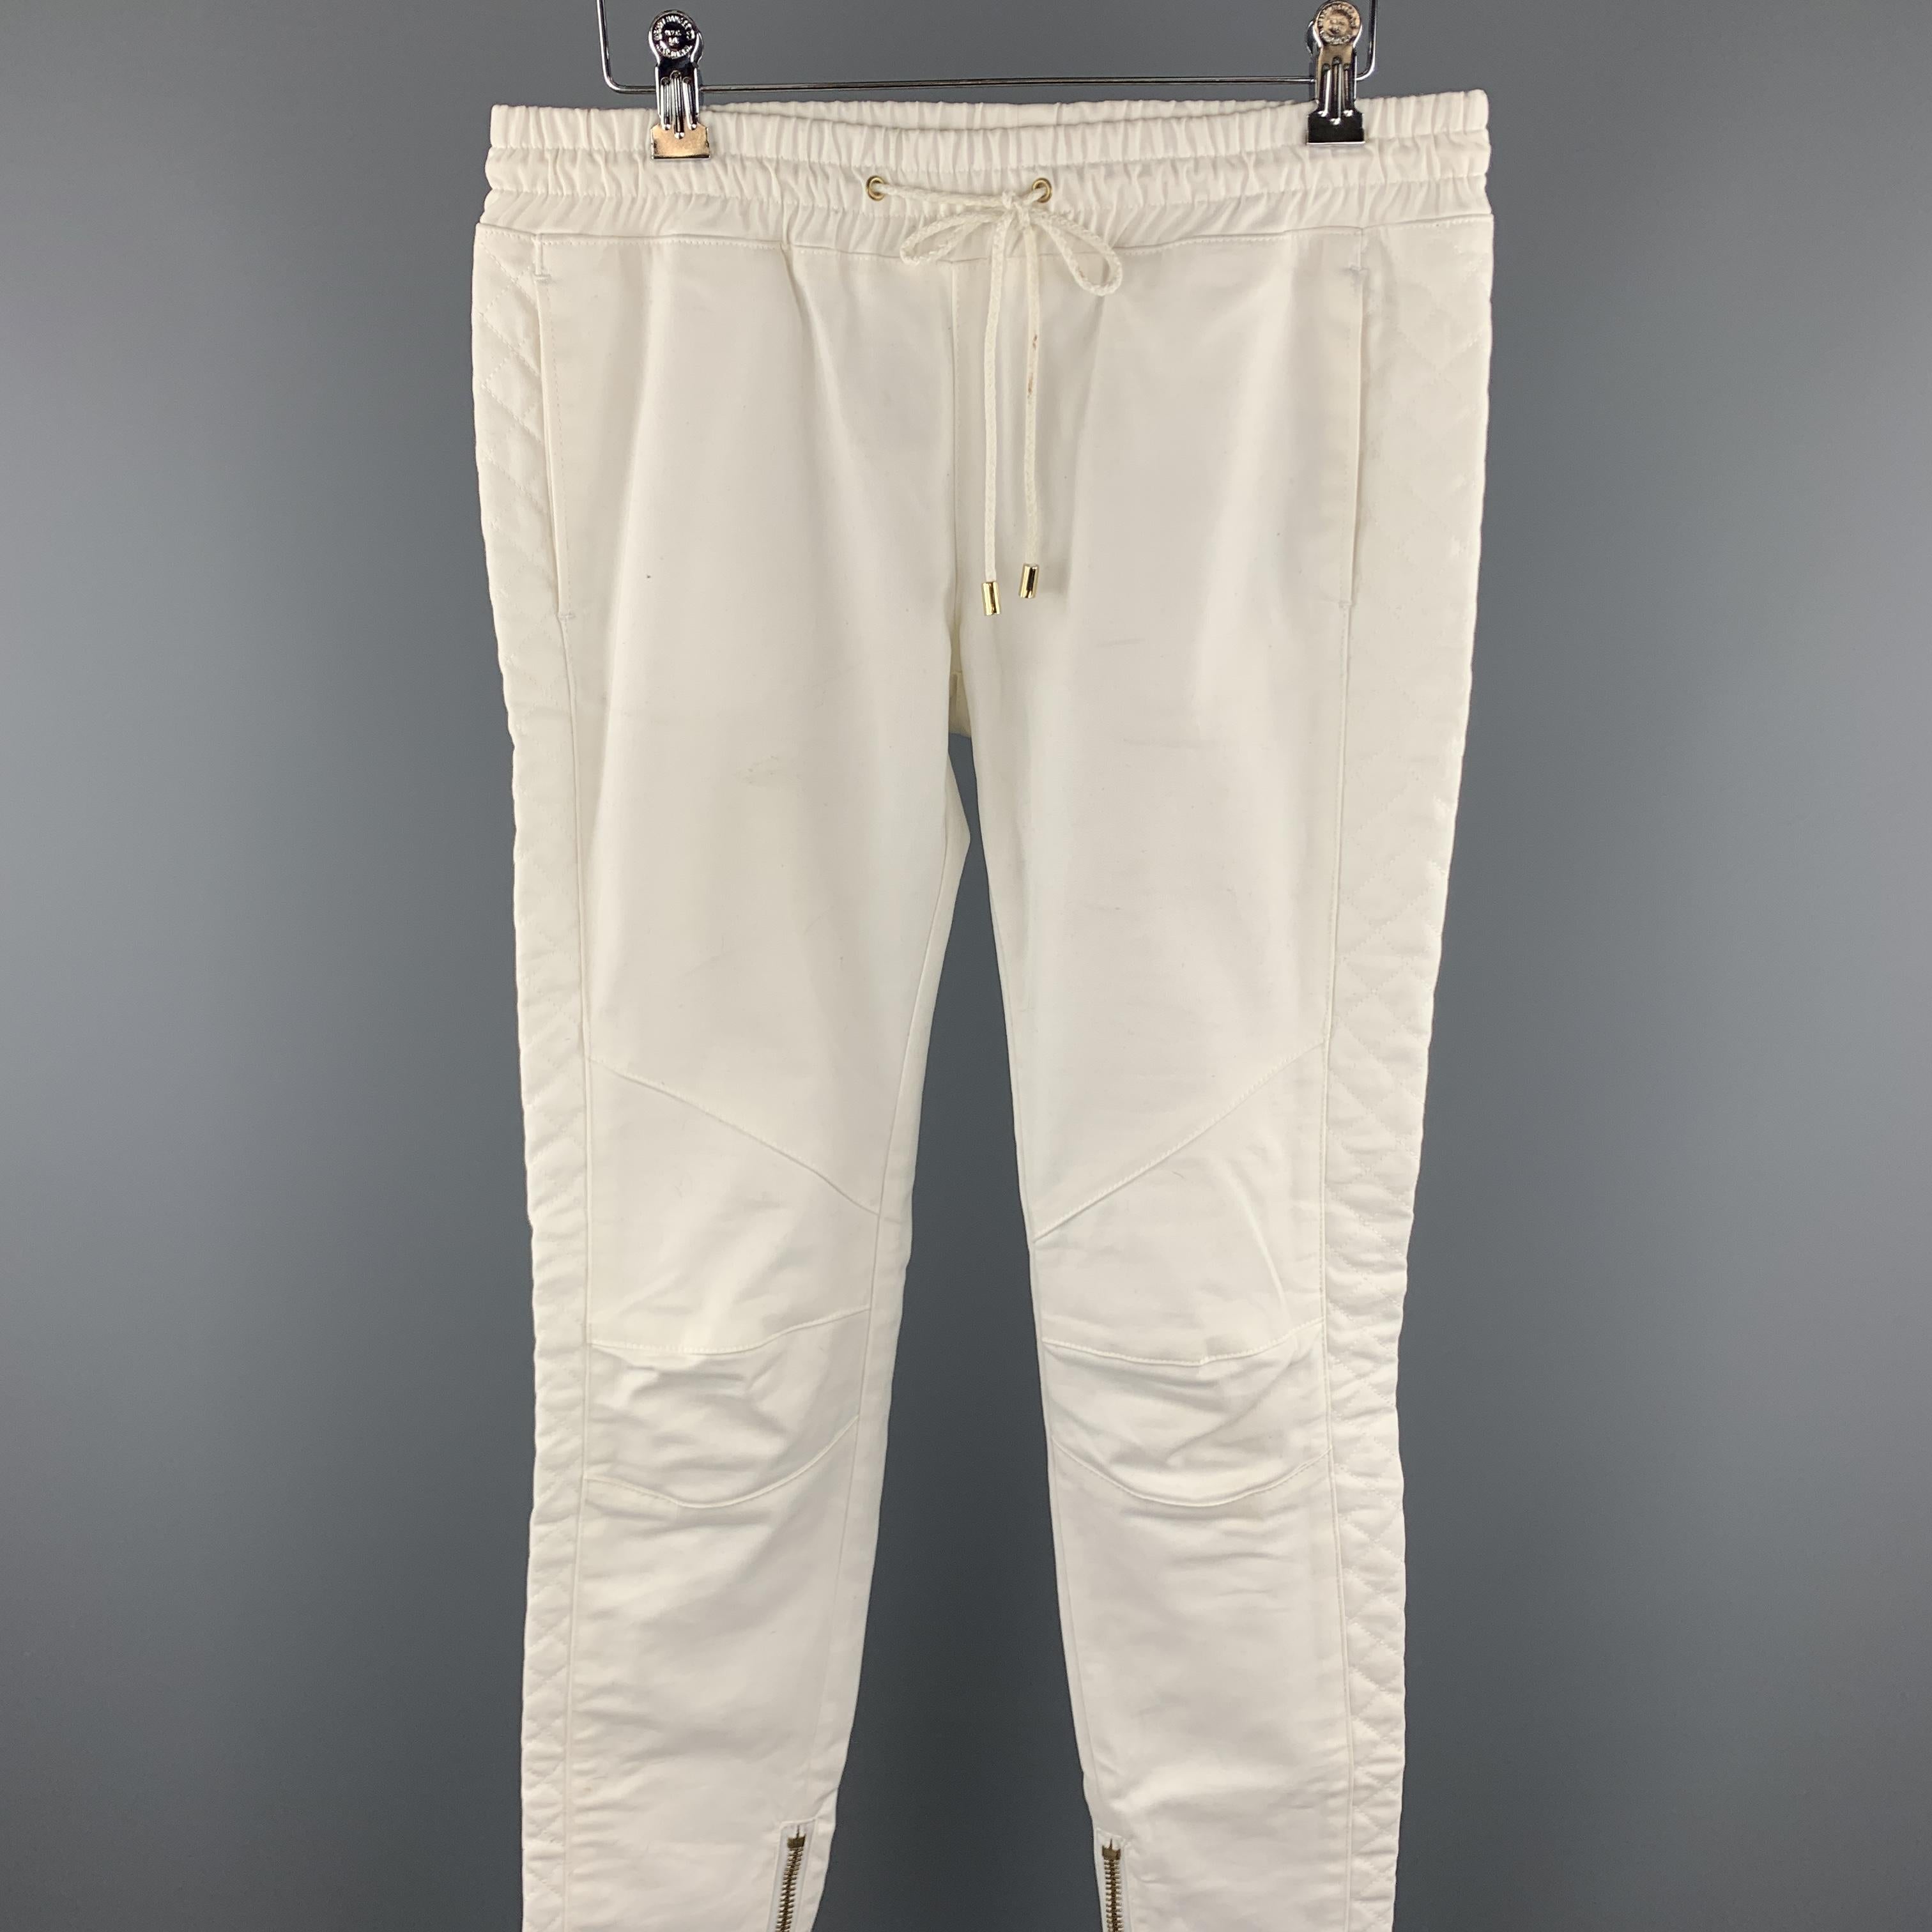 PIERRE BALMAIN causal pants comes in a cream cotton featuring a elastic waistband, side quilted panels, knee stitching, slit pockets, leg zippers, and a drawstring closure. Discoloration throughout. Made in Italy.

Fair Pre-Owned Condition.
Marked: